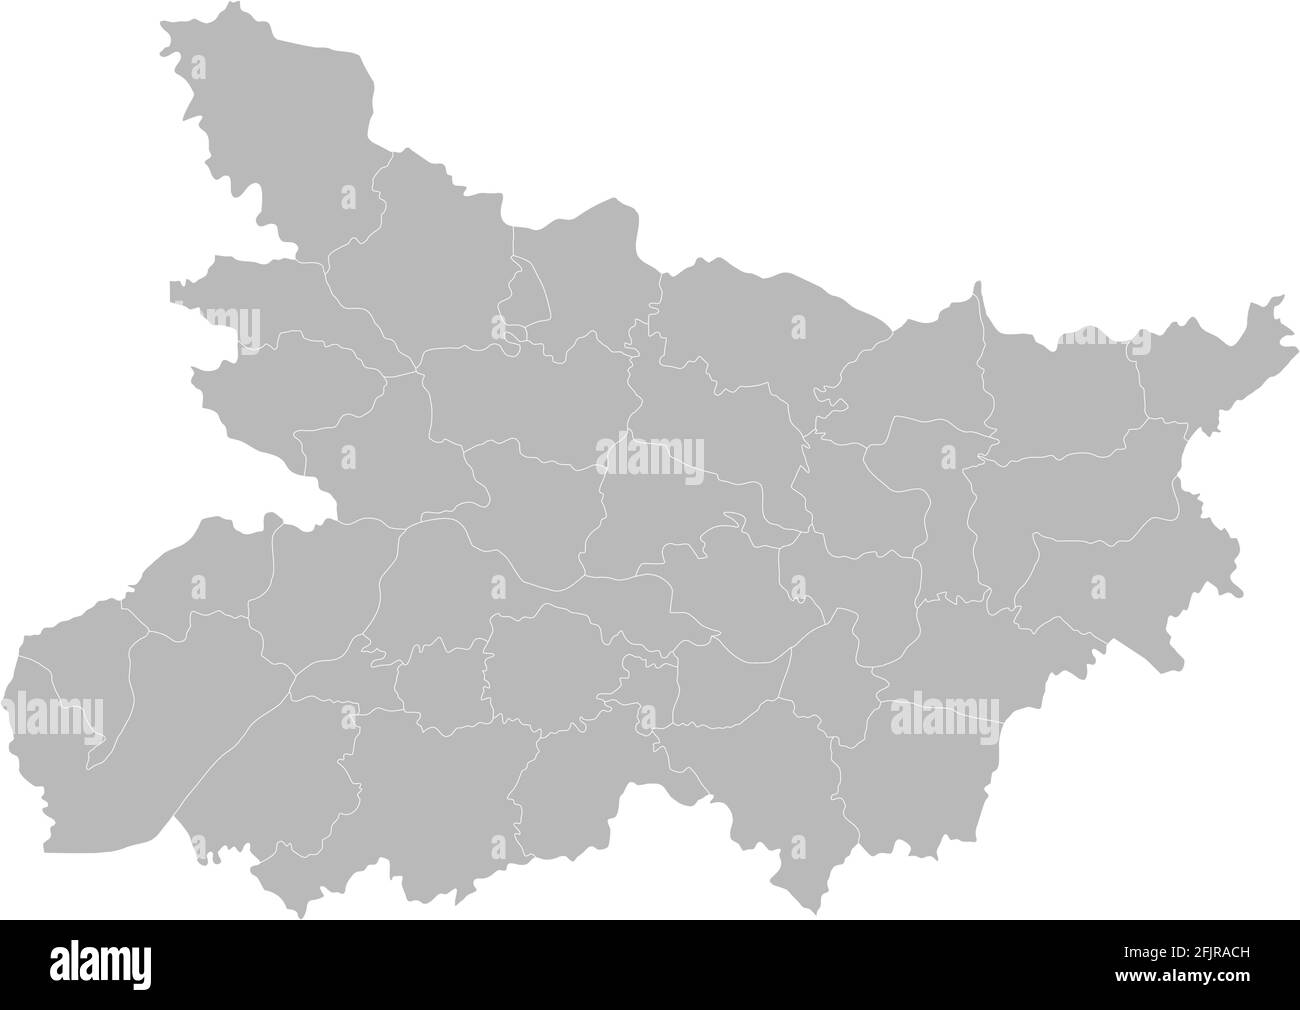 Bihar districts map. Indian state. Gray background. Business concepts and Backgrounds. Stock Vector